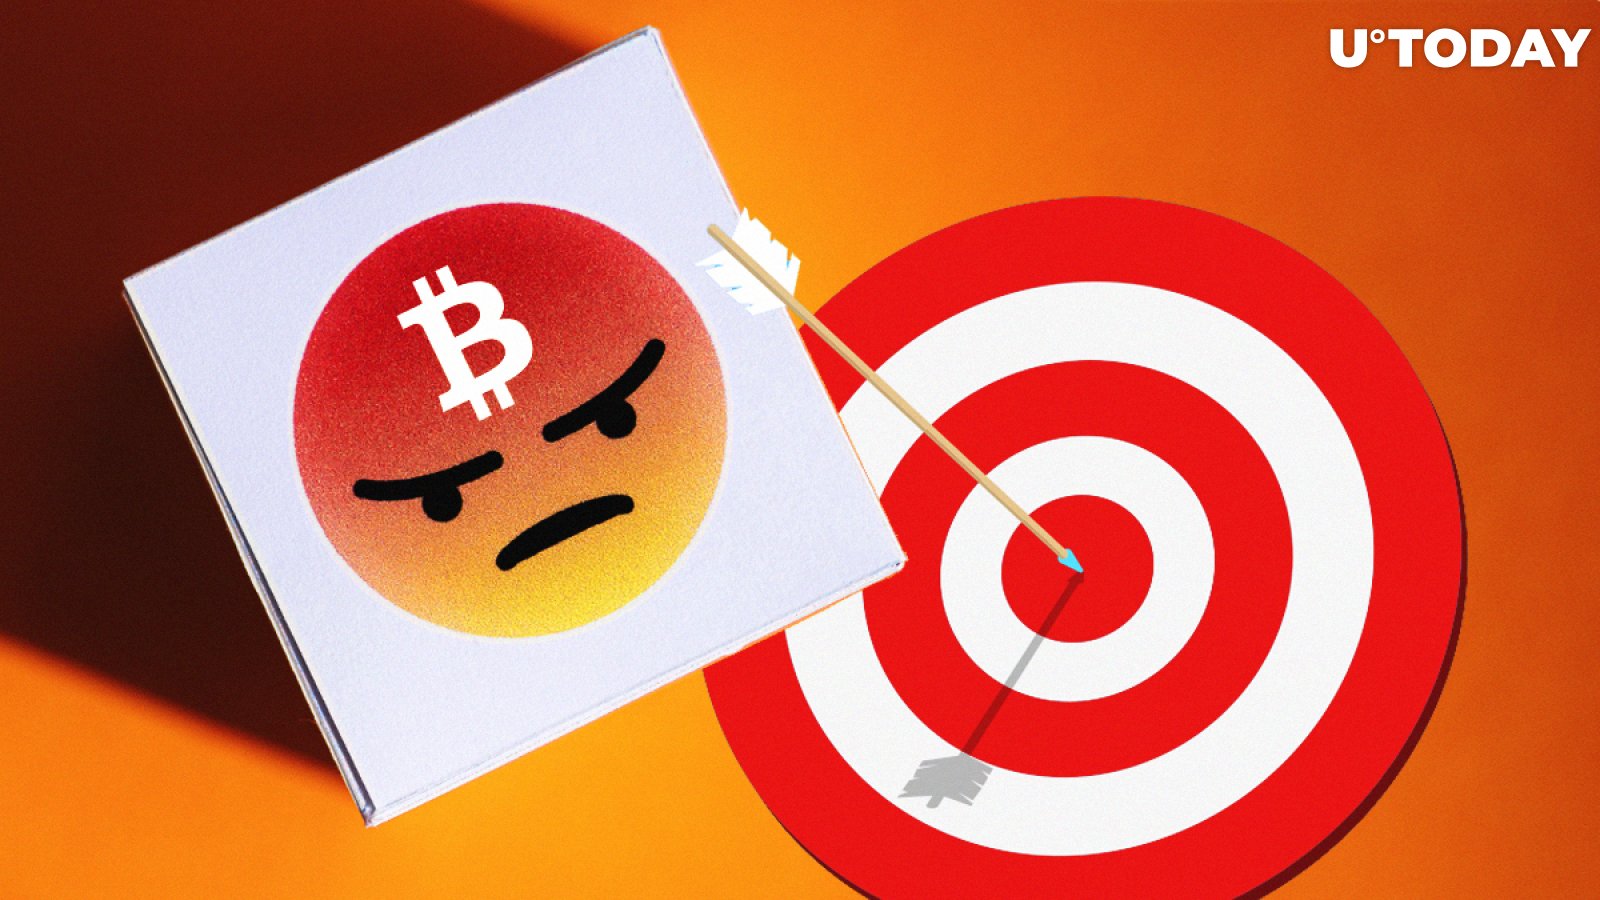 Bitcoin Violently Rejects $10k, Prompting Traders to Target $8,550 CME Gap